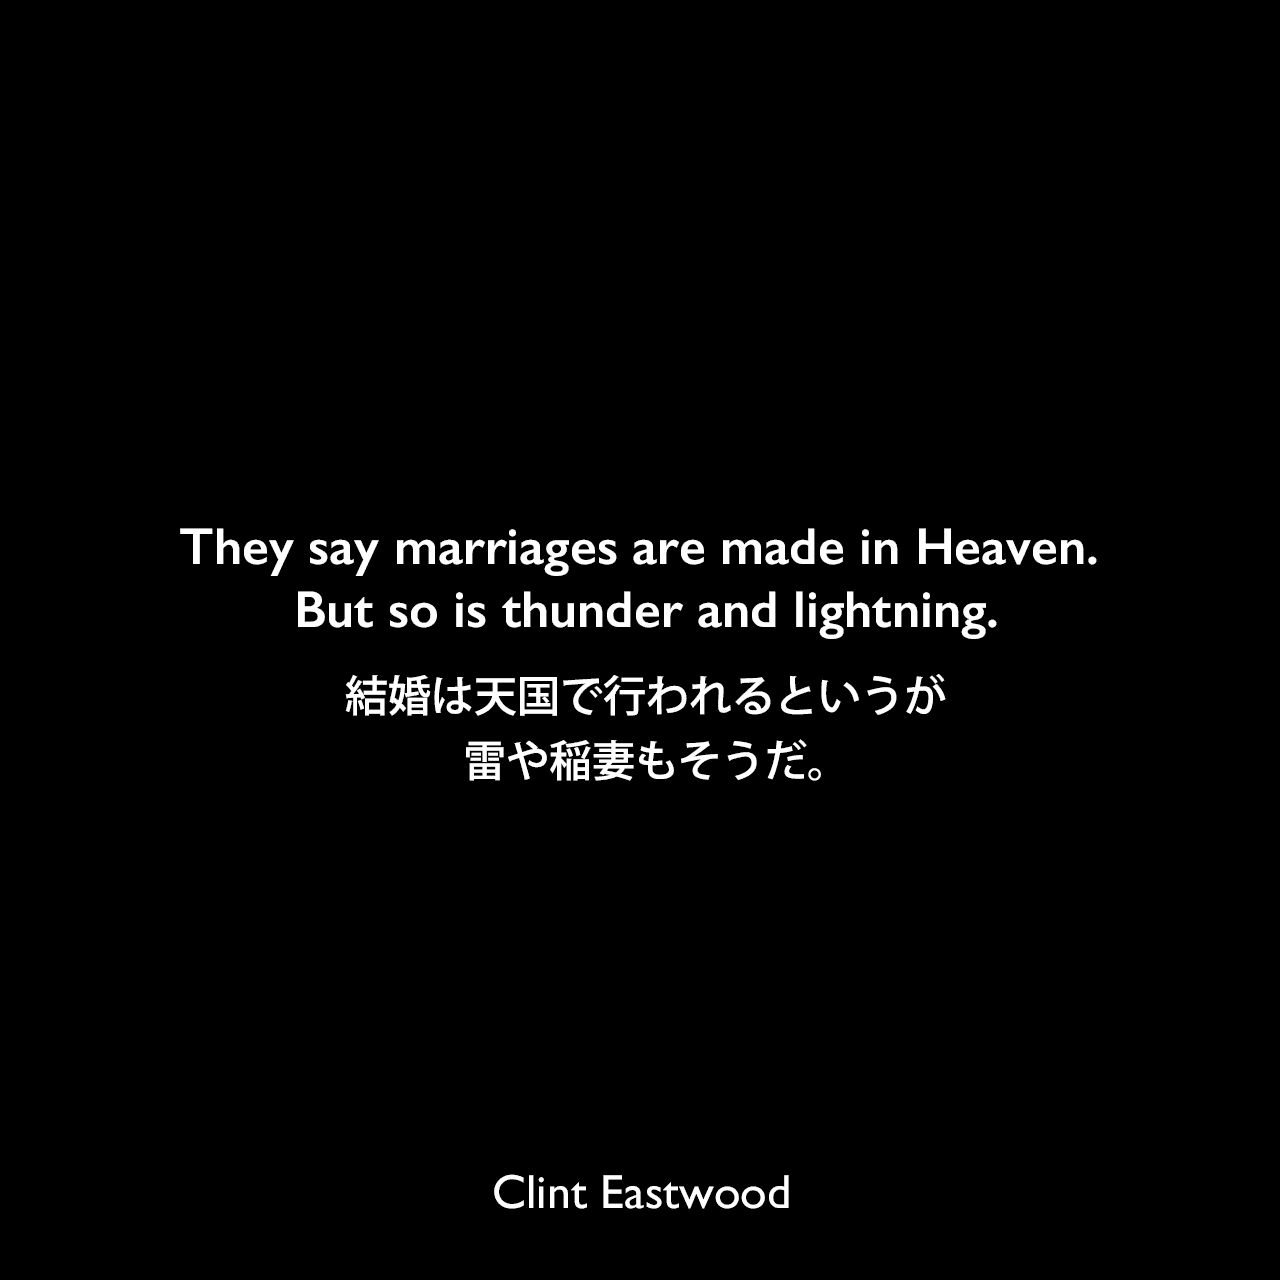 They say marriages are made in Heaven. But so is thunder and lightning.結婚は天国で行われるというが、雷や稲妻もそうだ。Clint Eastwood